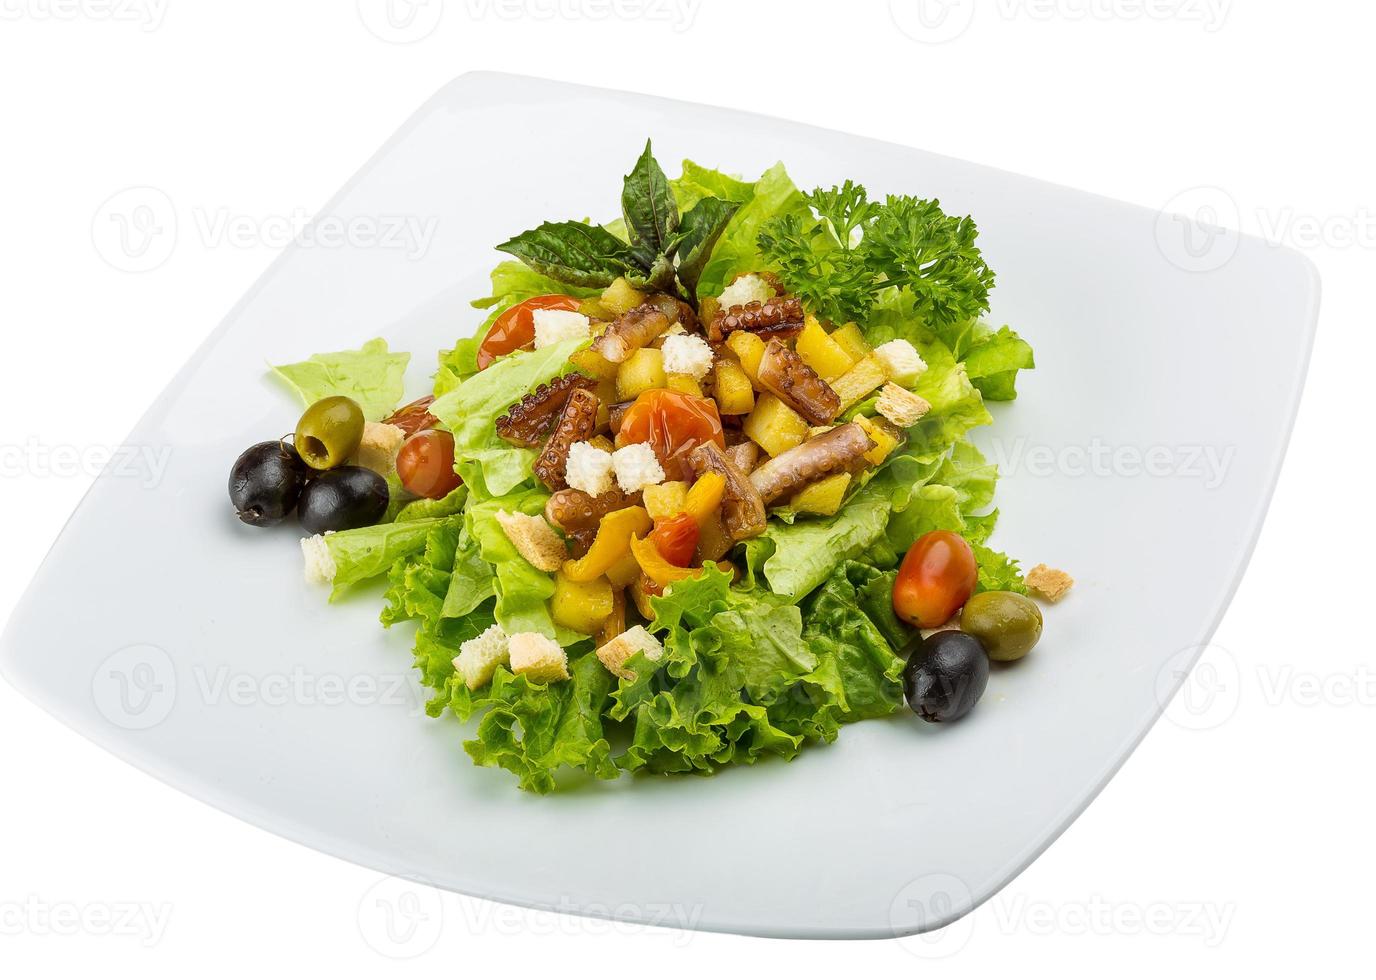 Octopus salad on the plate and white background photo